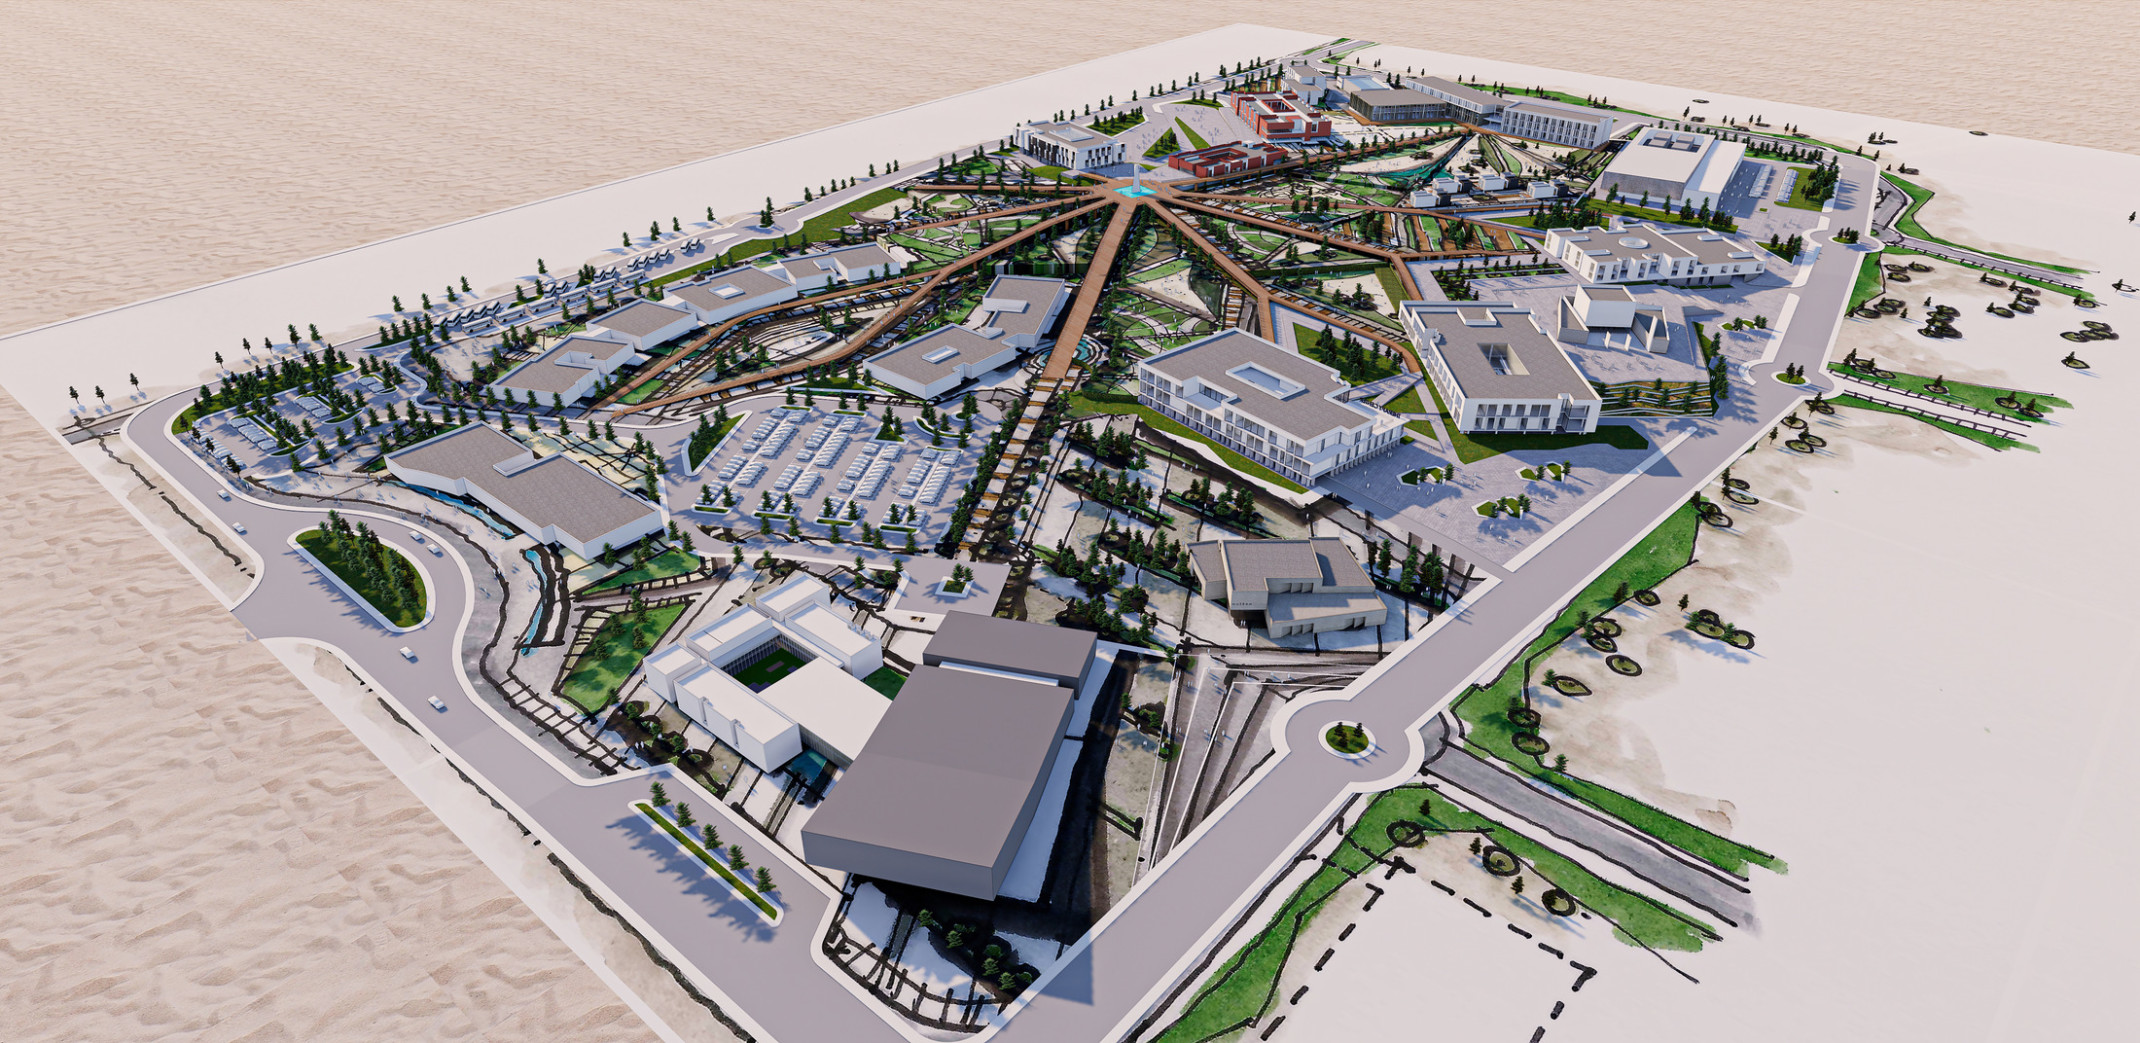 The Center of Harmony primary school masterplan illustration seen from above with ramps leading to central connecting platform